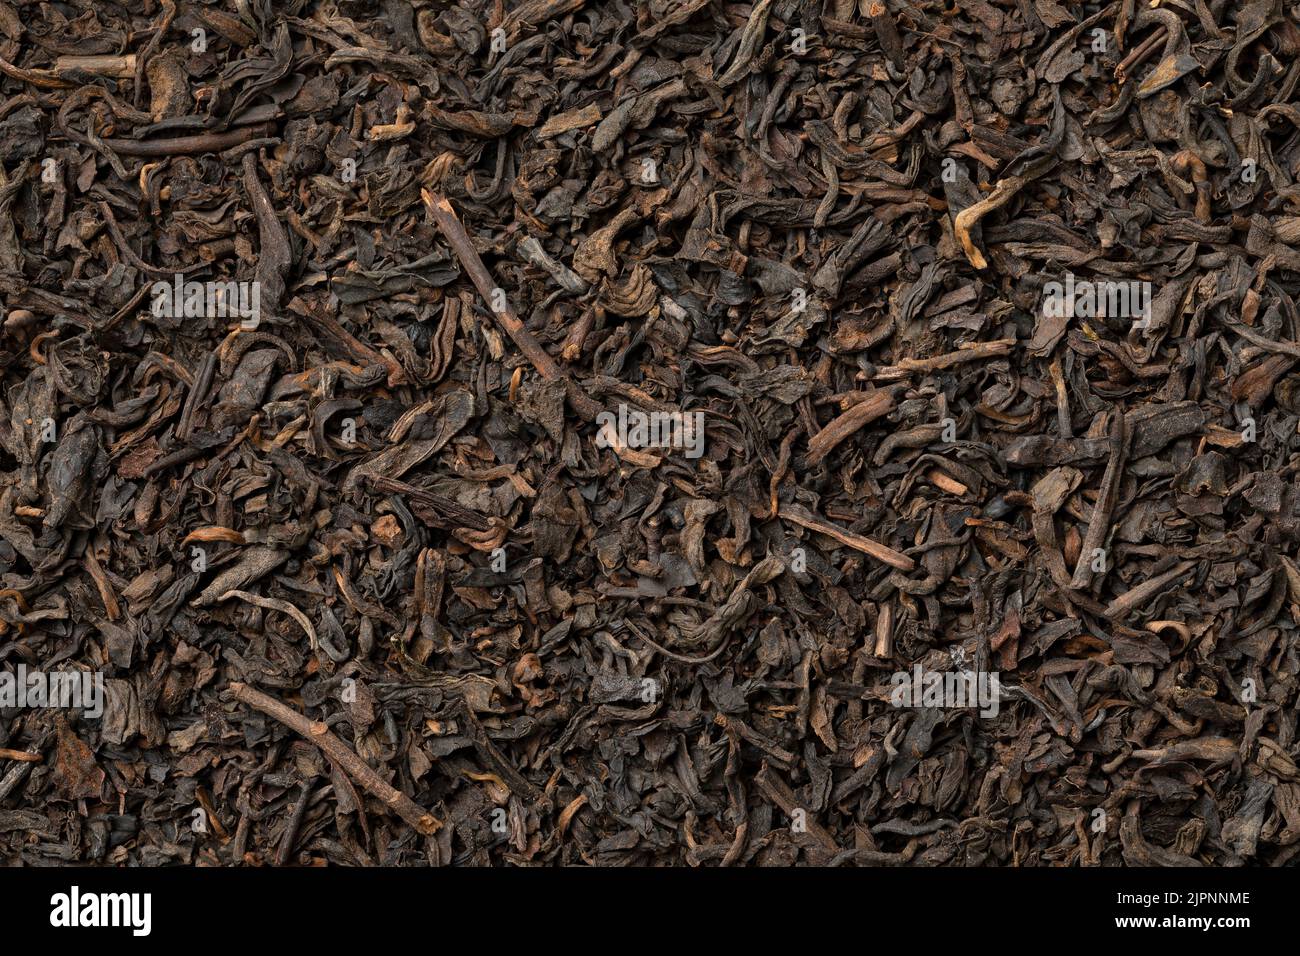 Chinese Pu Ehr dried tea leaves close up full frame as background Stock Photo